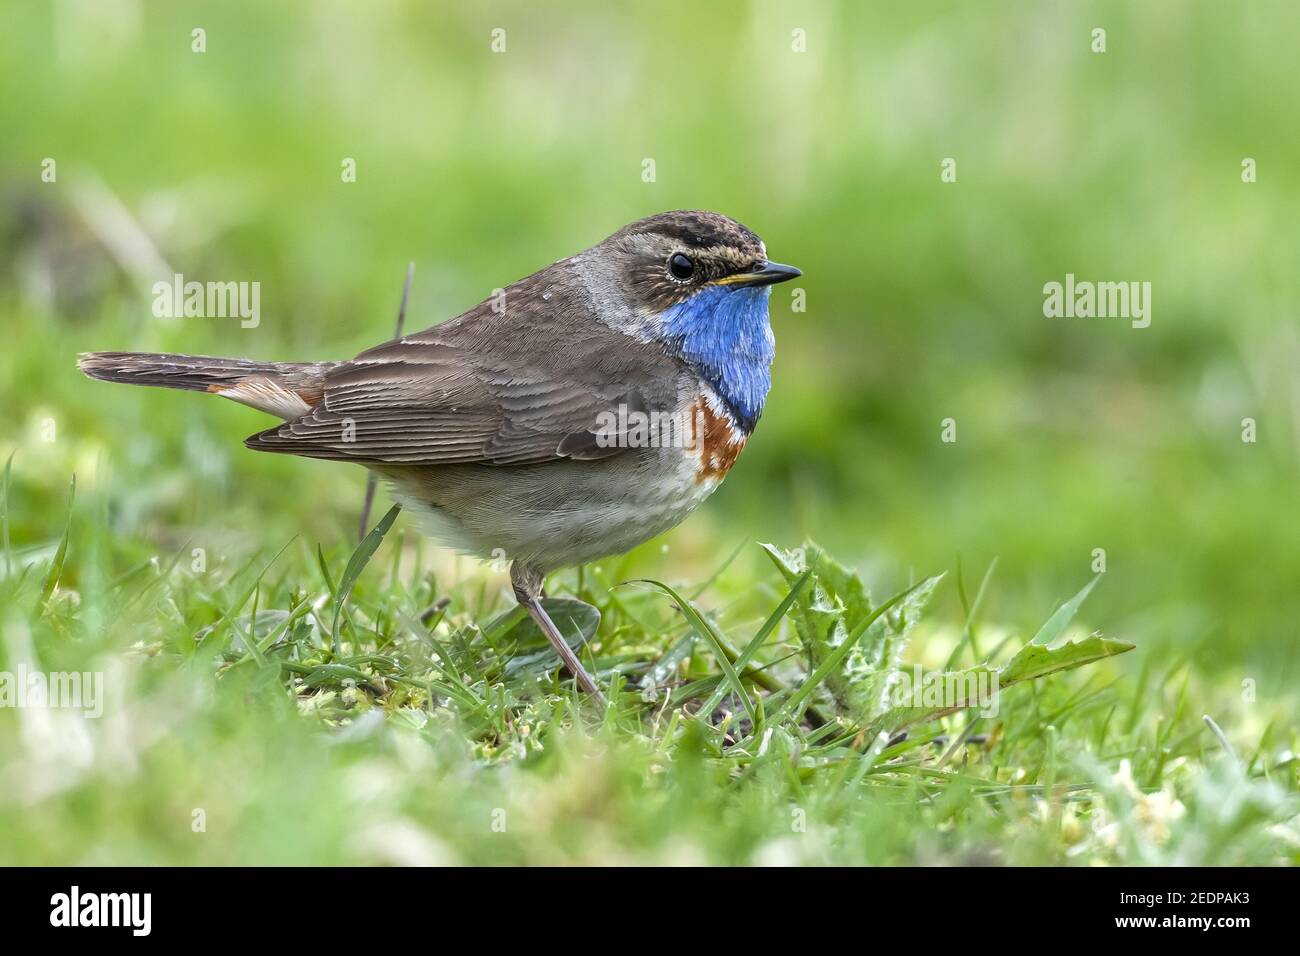 White-spotted Bluethroat (Luscinia svecica cyanecula), male sitting on the grass, Belgium Stock Photo